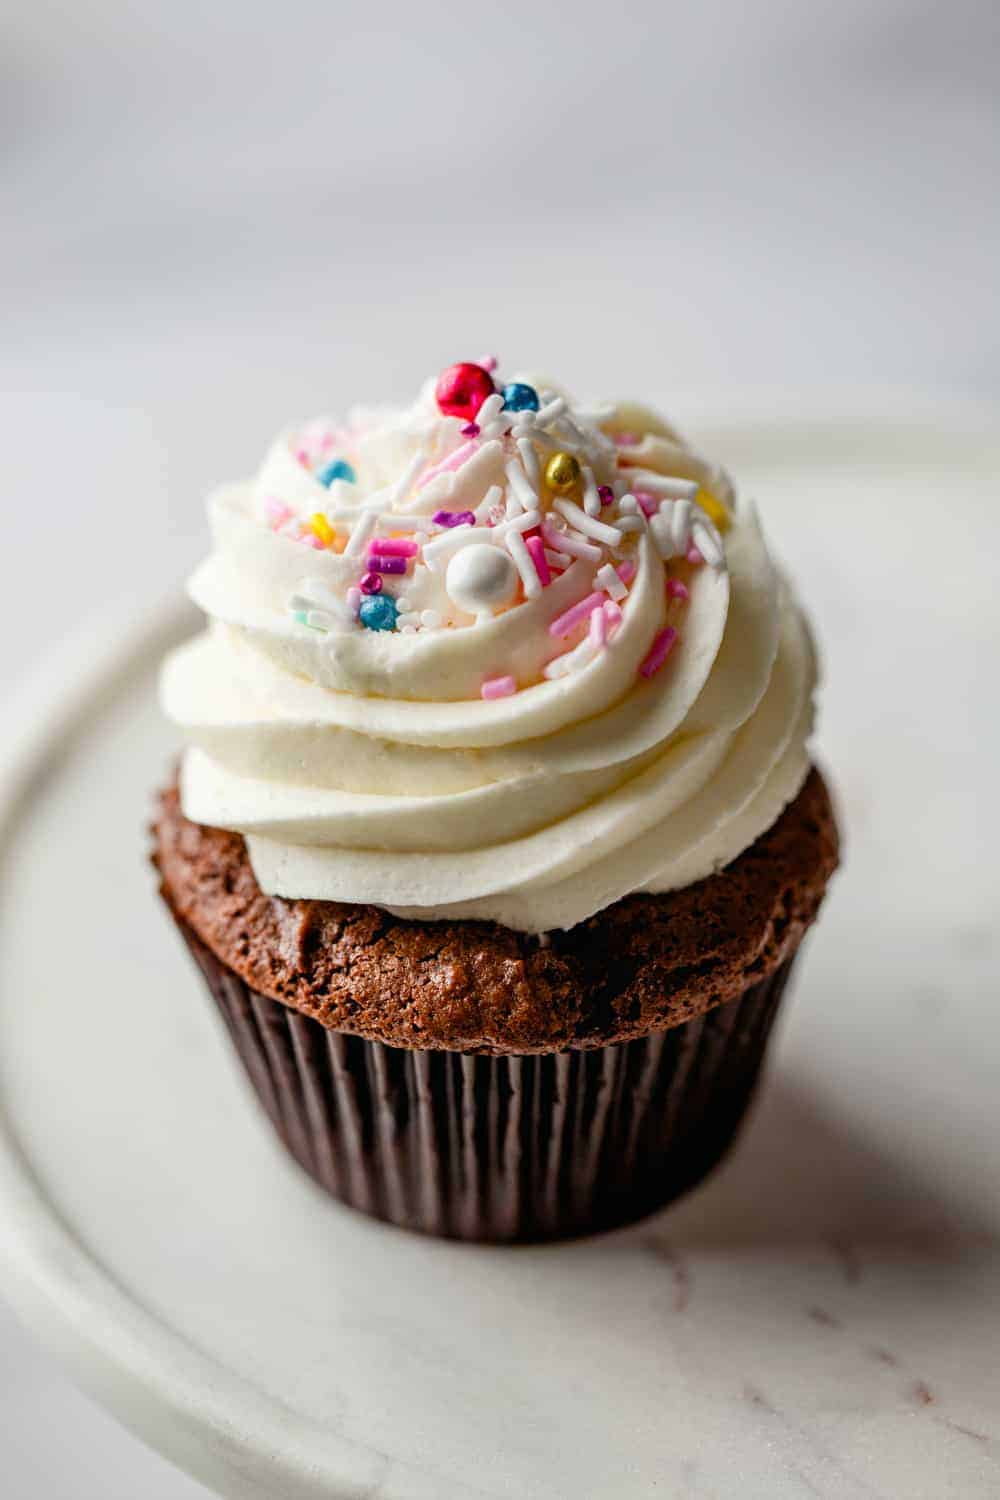 Homemade Buttercream Frosting is a key recipe to have on hand!